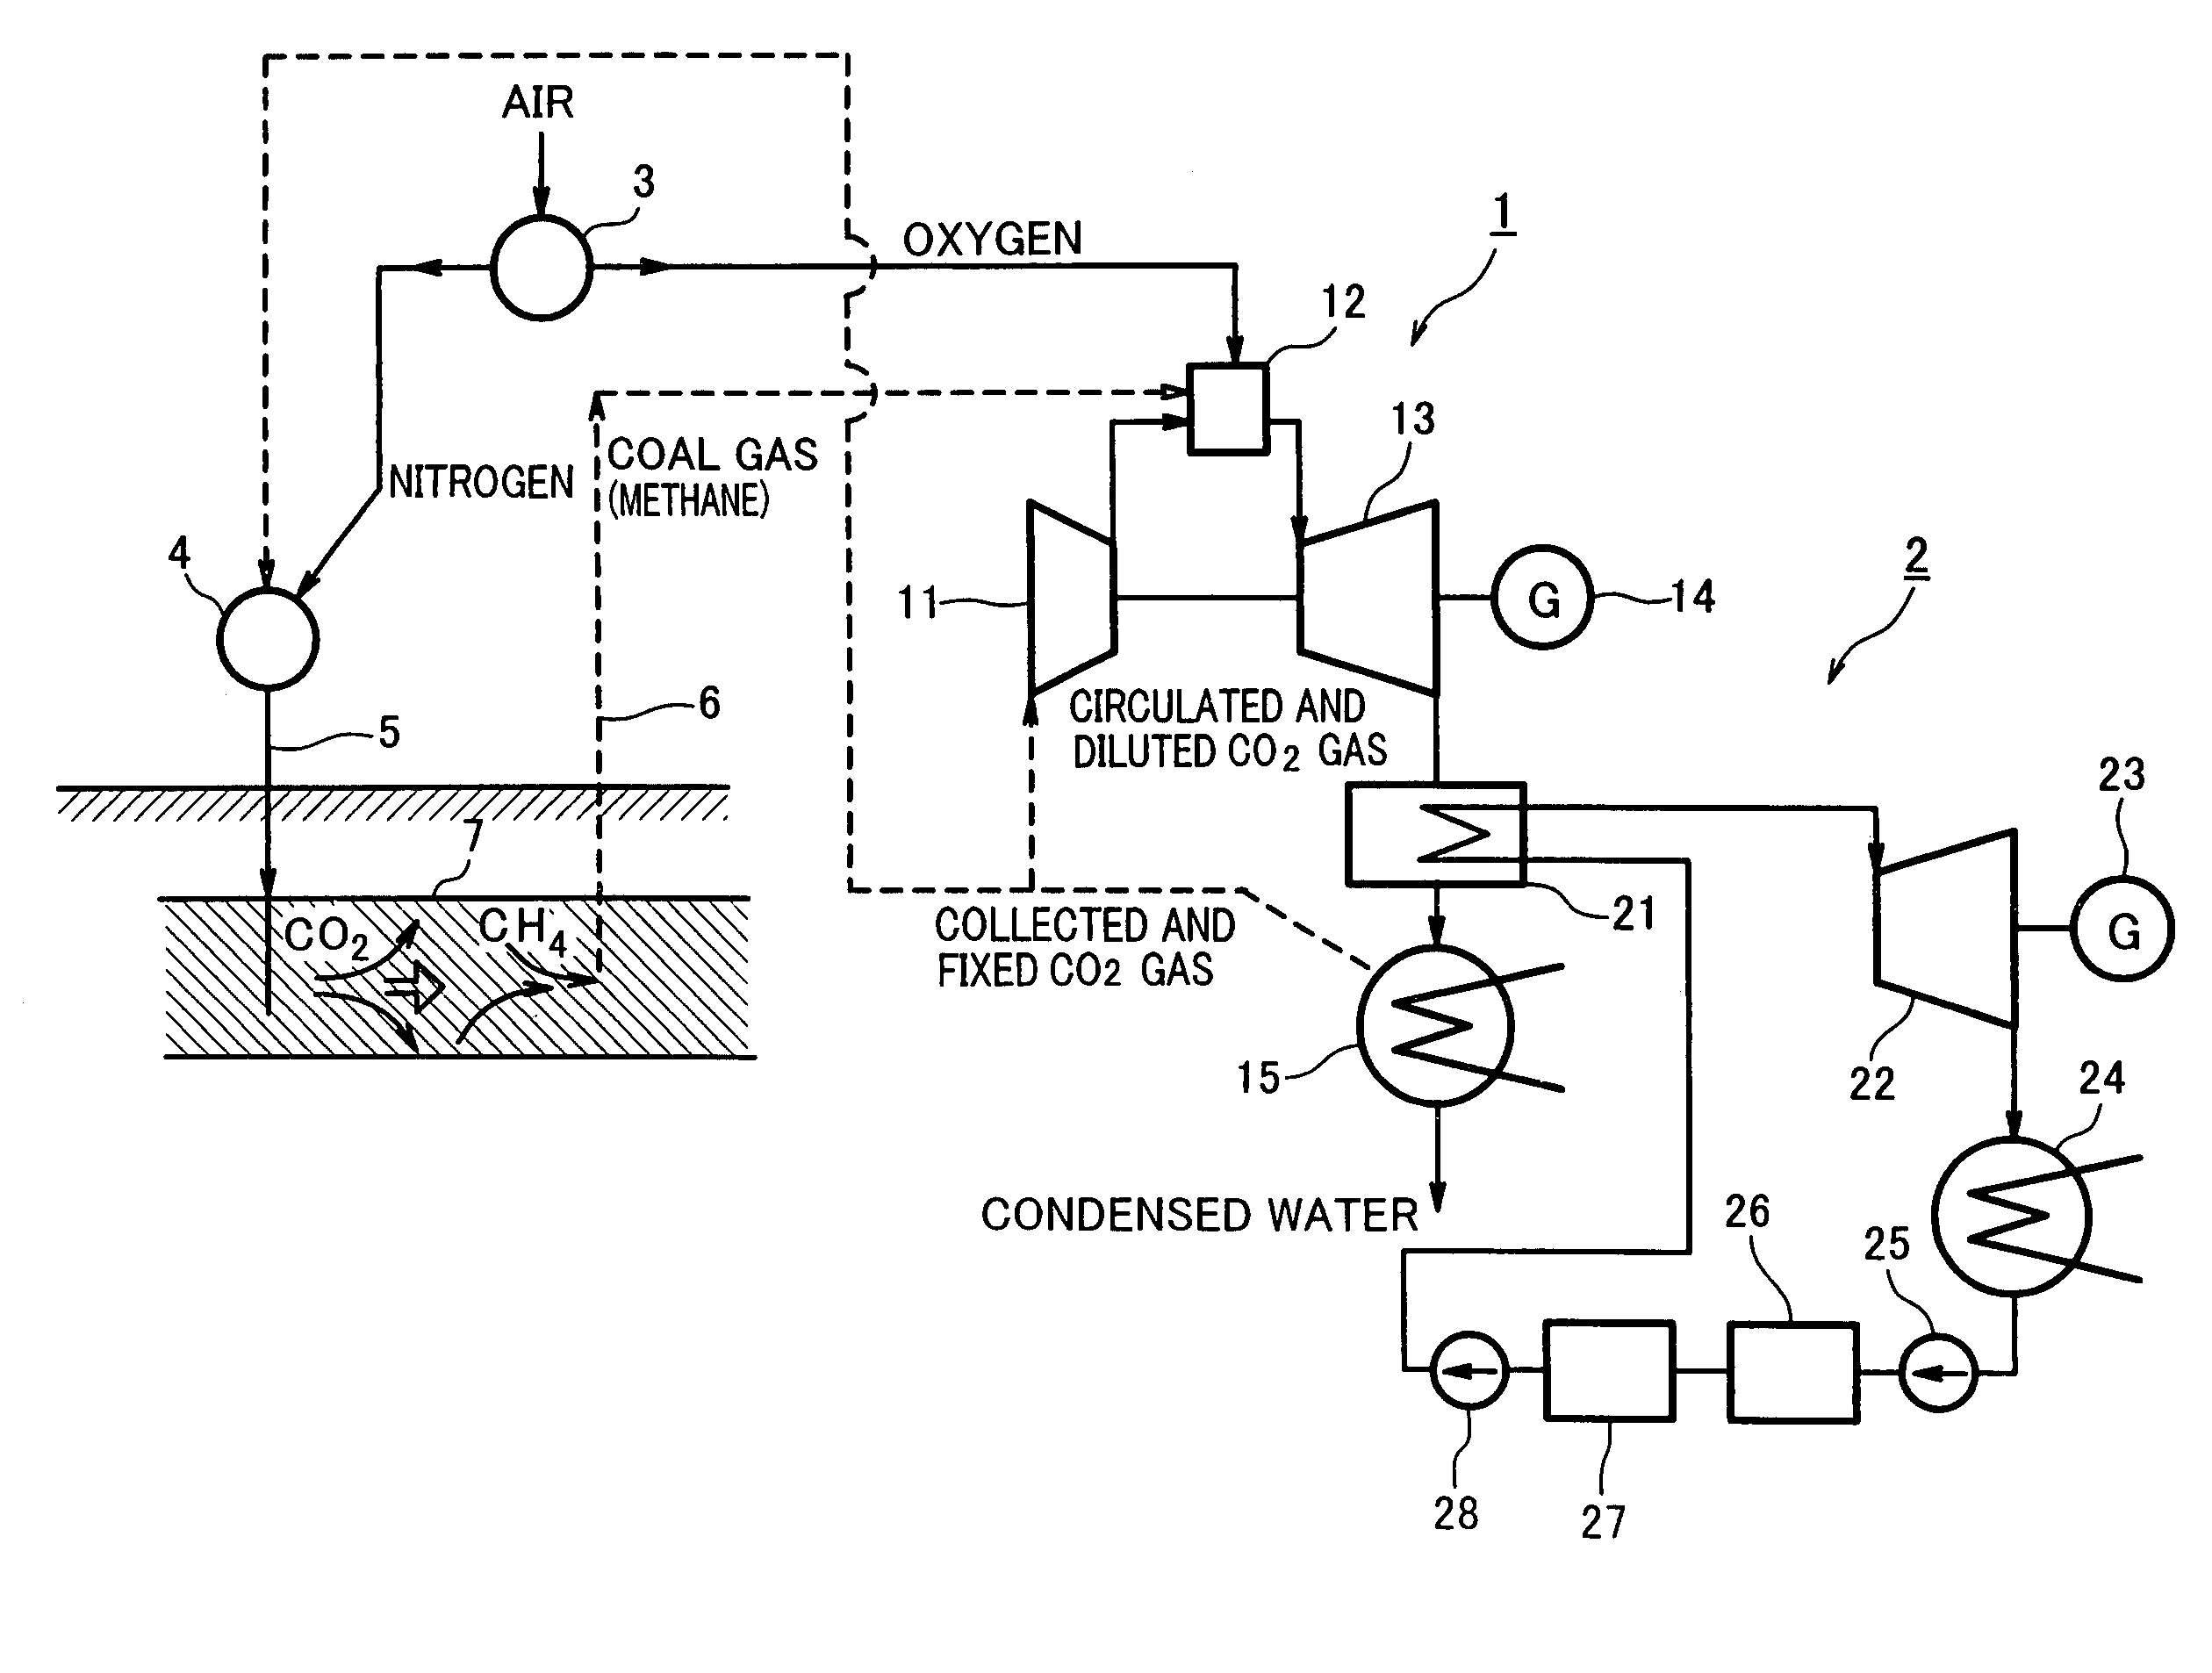 Gas turbine system comprising closed system of fuel and combustion gas using underground coal layer